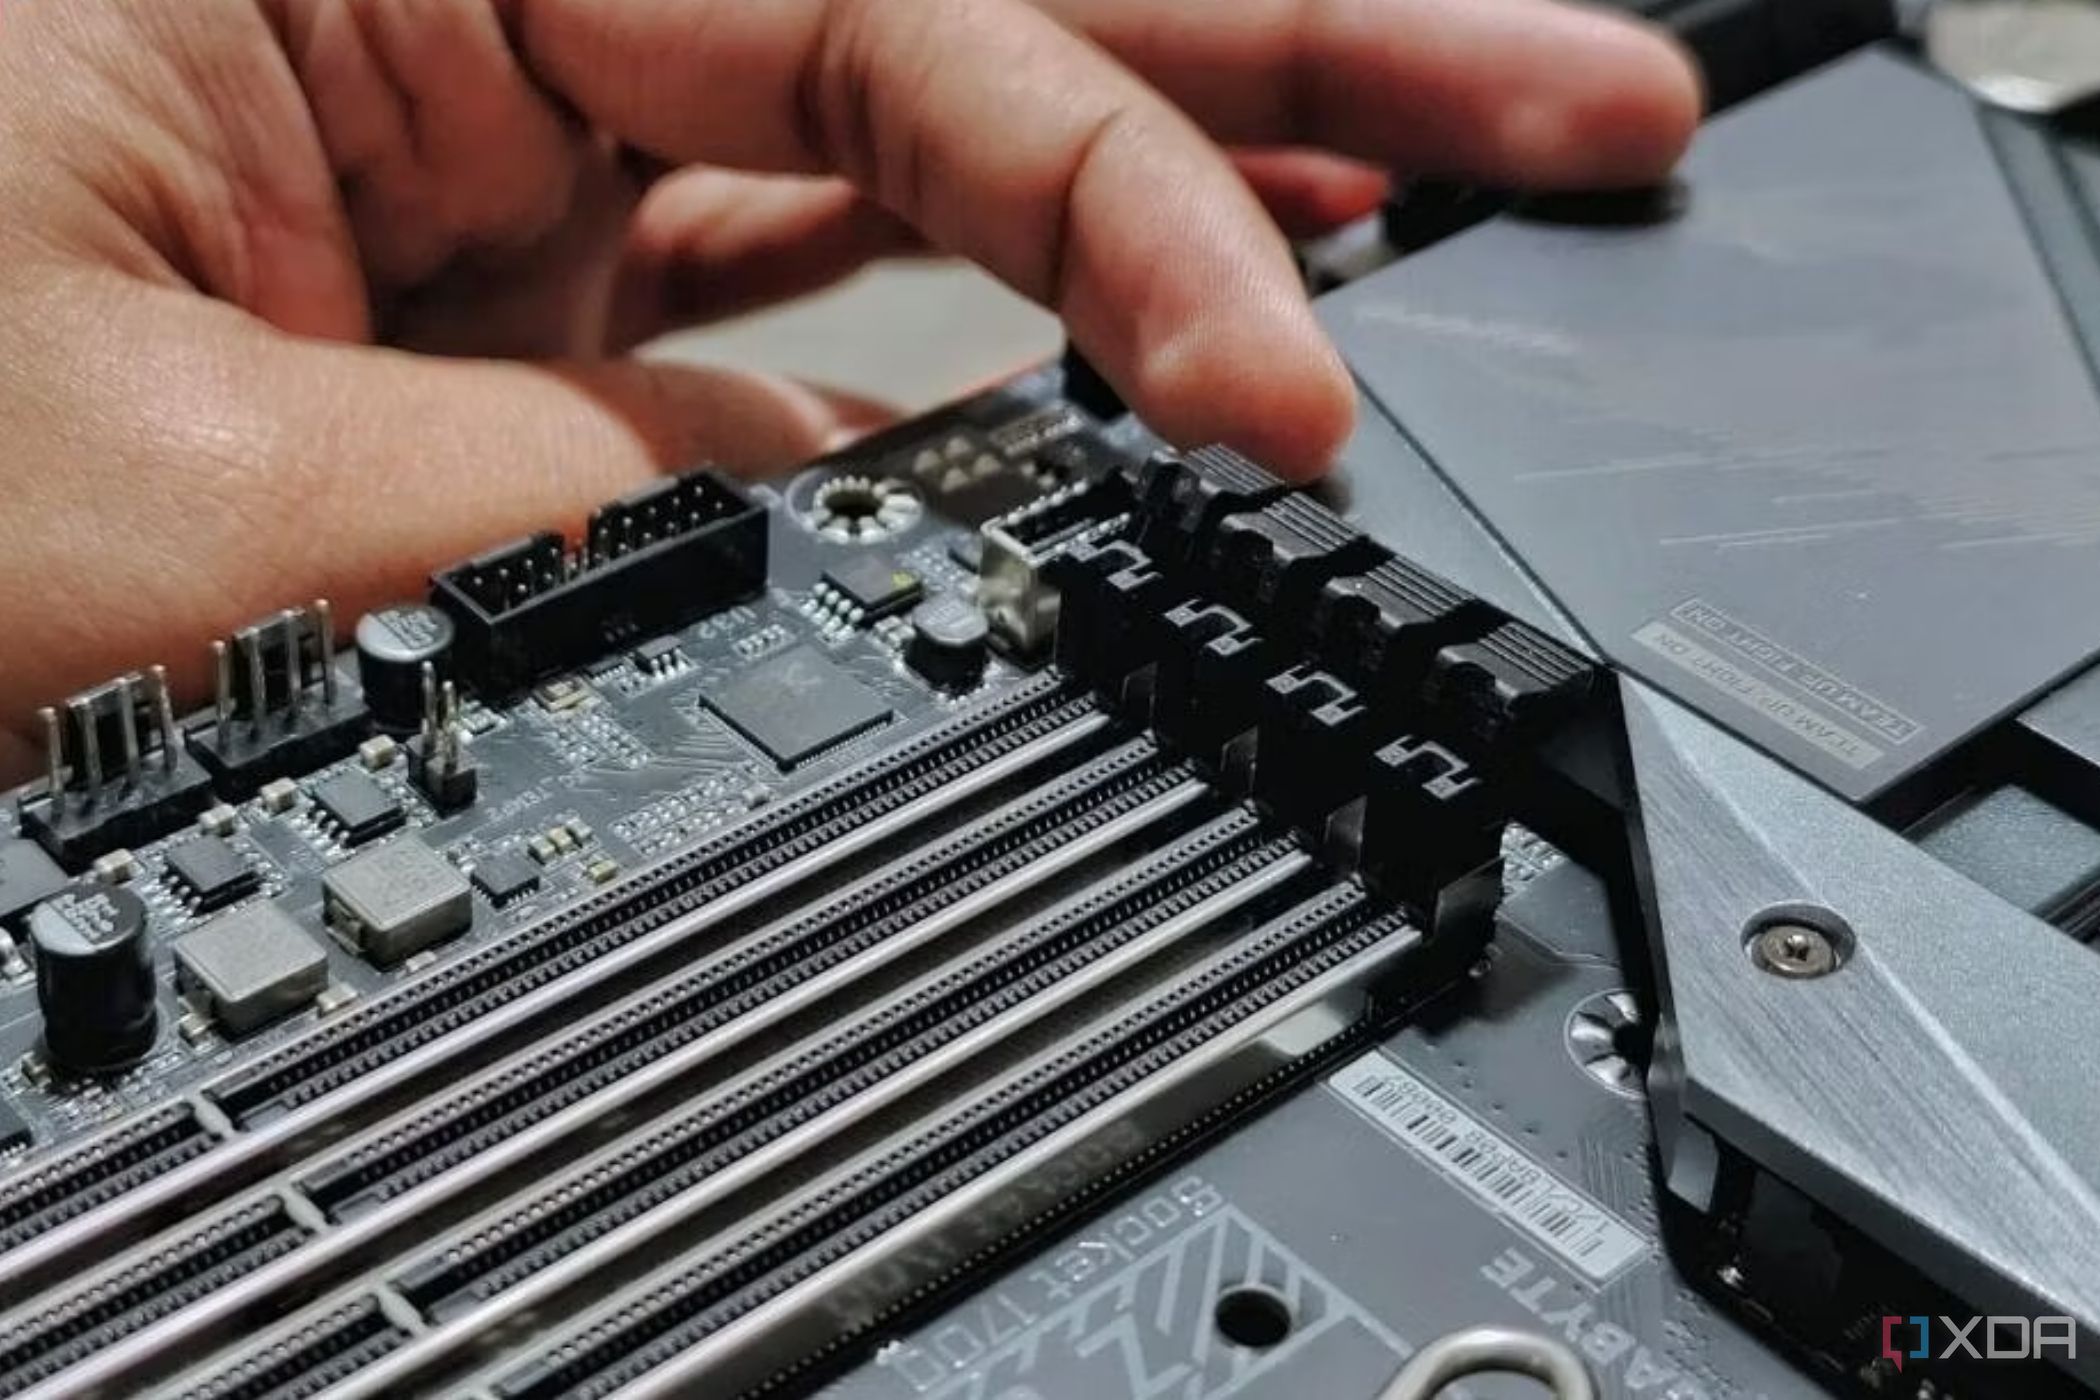 An image showing a person undoing the latches securing the ram modules on the slot.